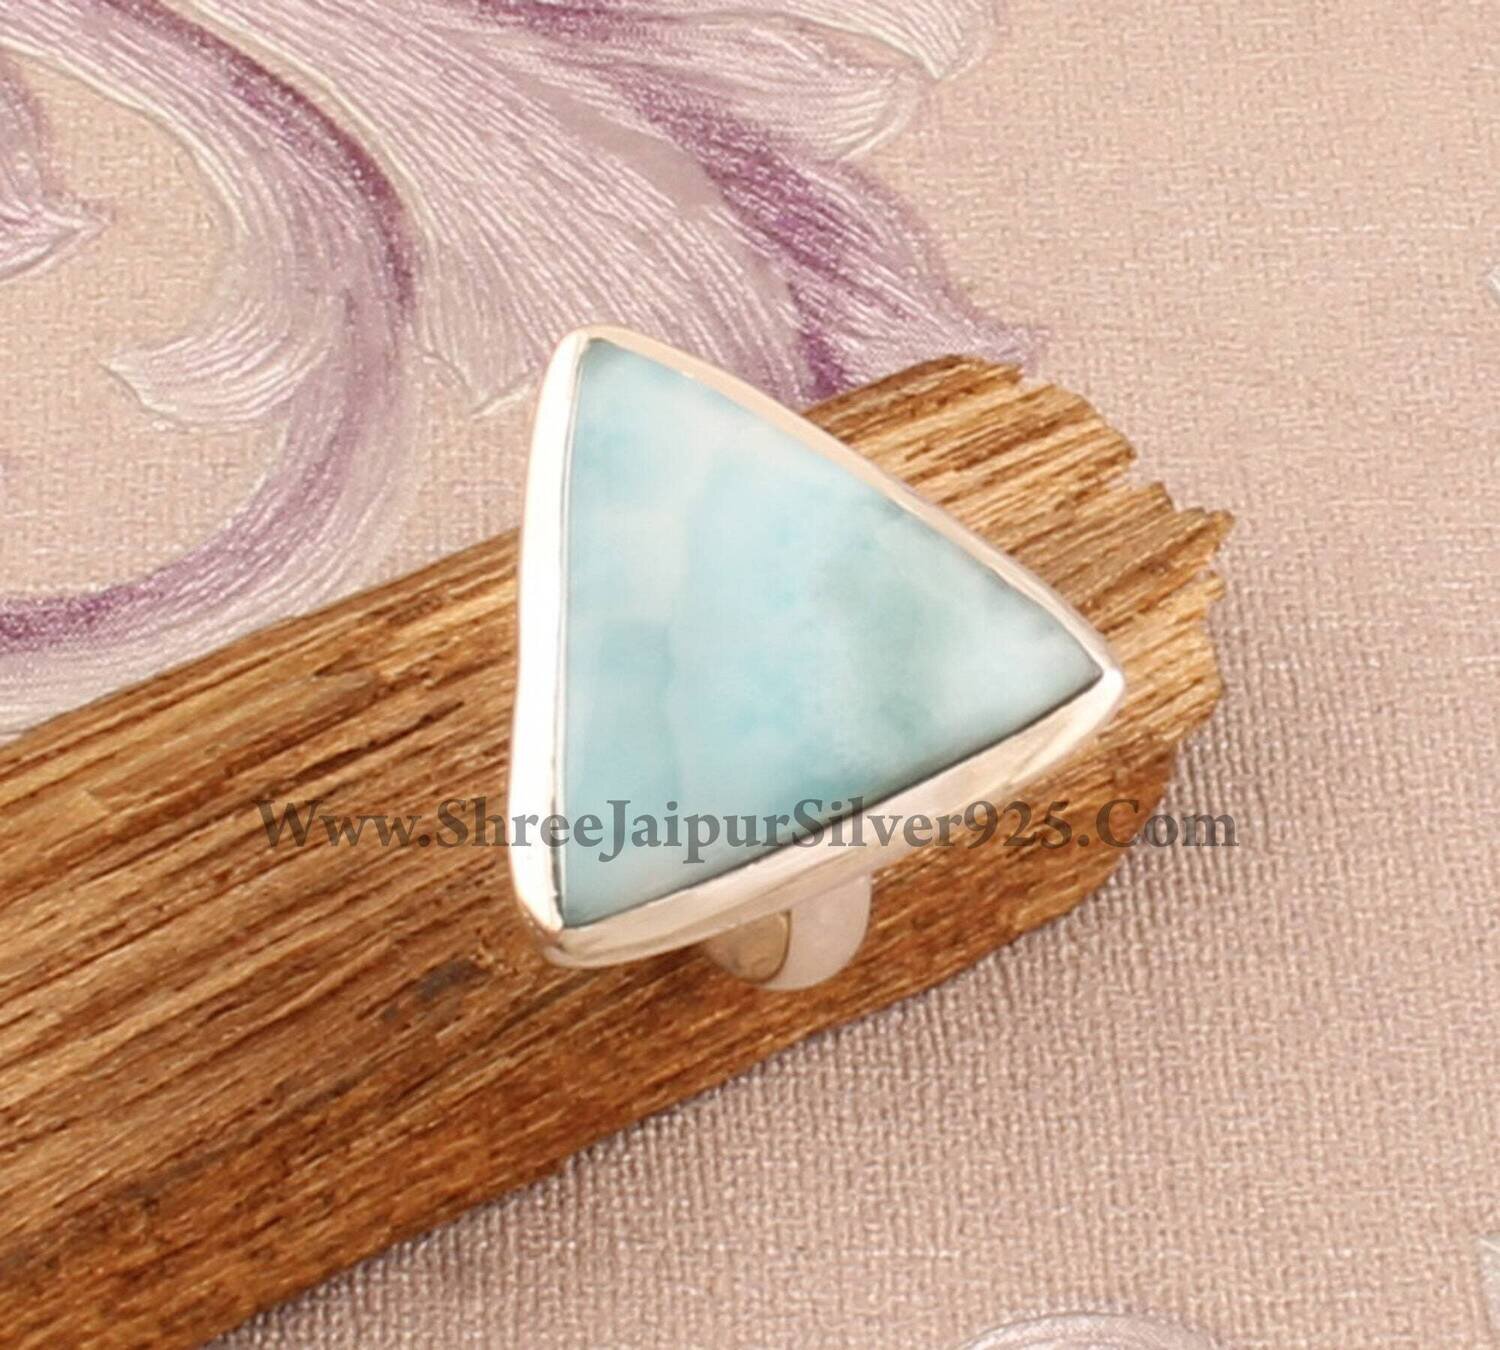 Natural Larimar 925 Sterling Silver Triangle Gemstone Ring For Women, Larimar Solid Silver Ring For Her Handmade Gemstone Ring For Gift Idea